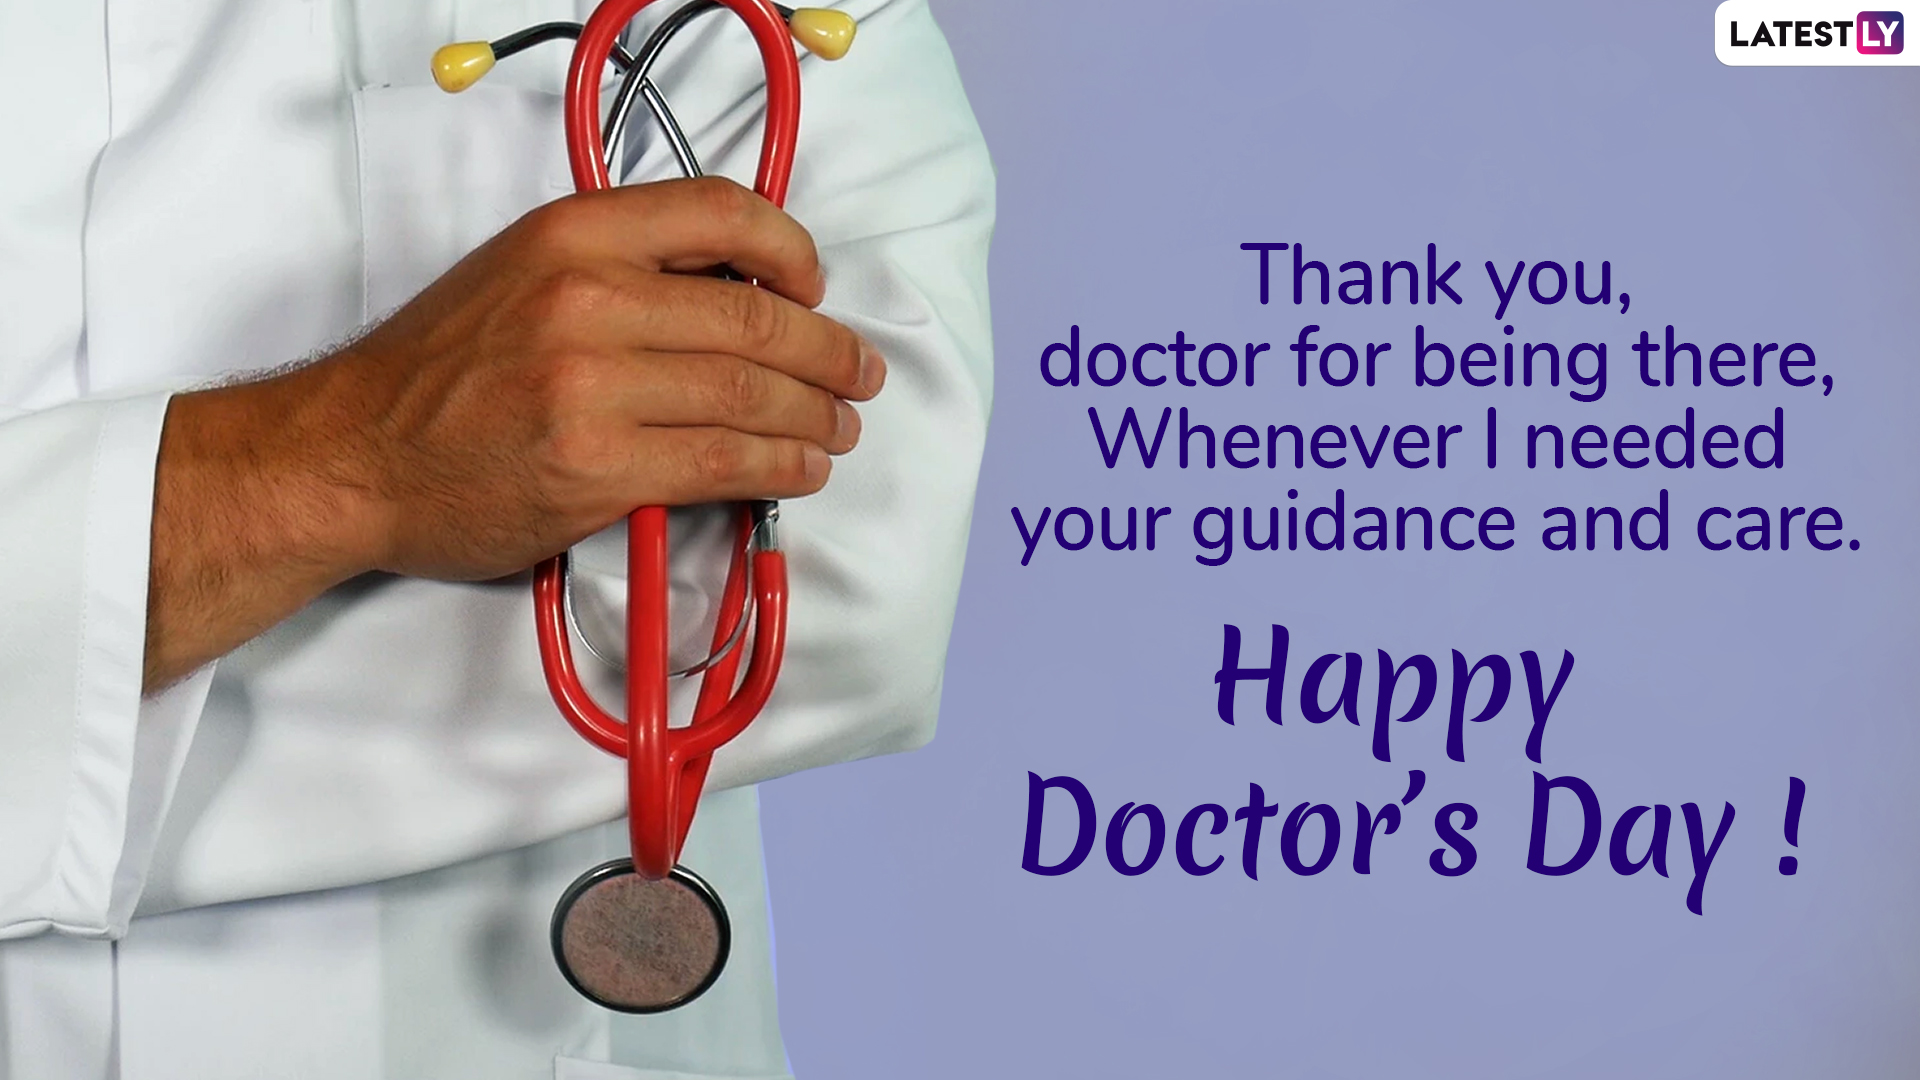 210-happy-doctors-day-illustrations-royalty-free-vector-graphics